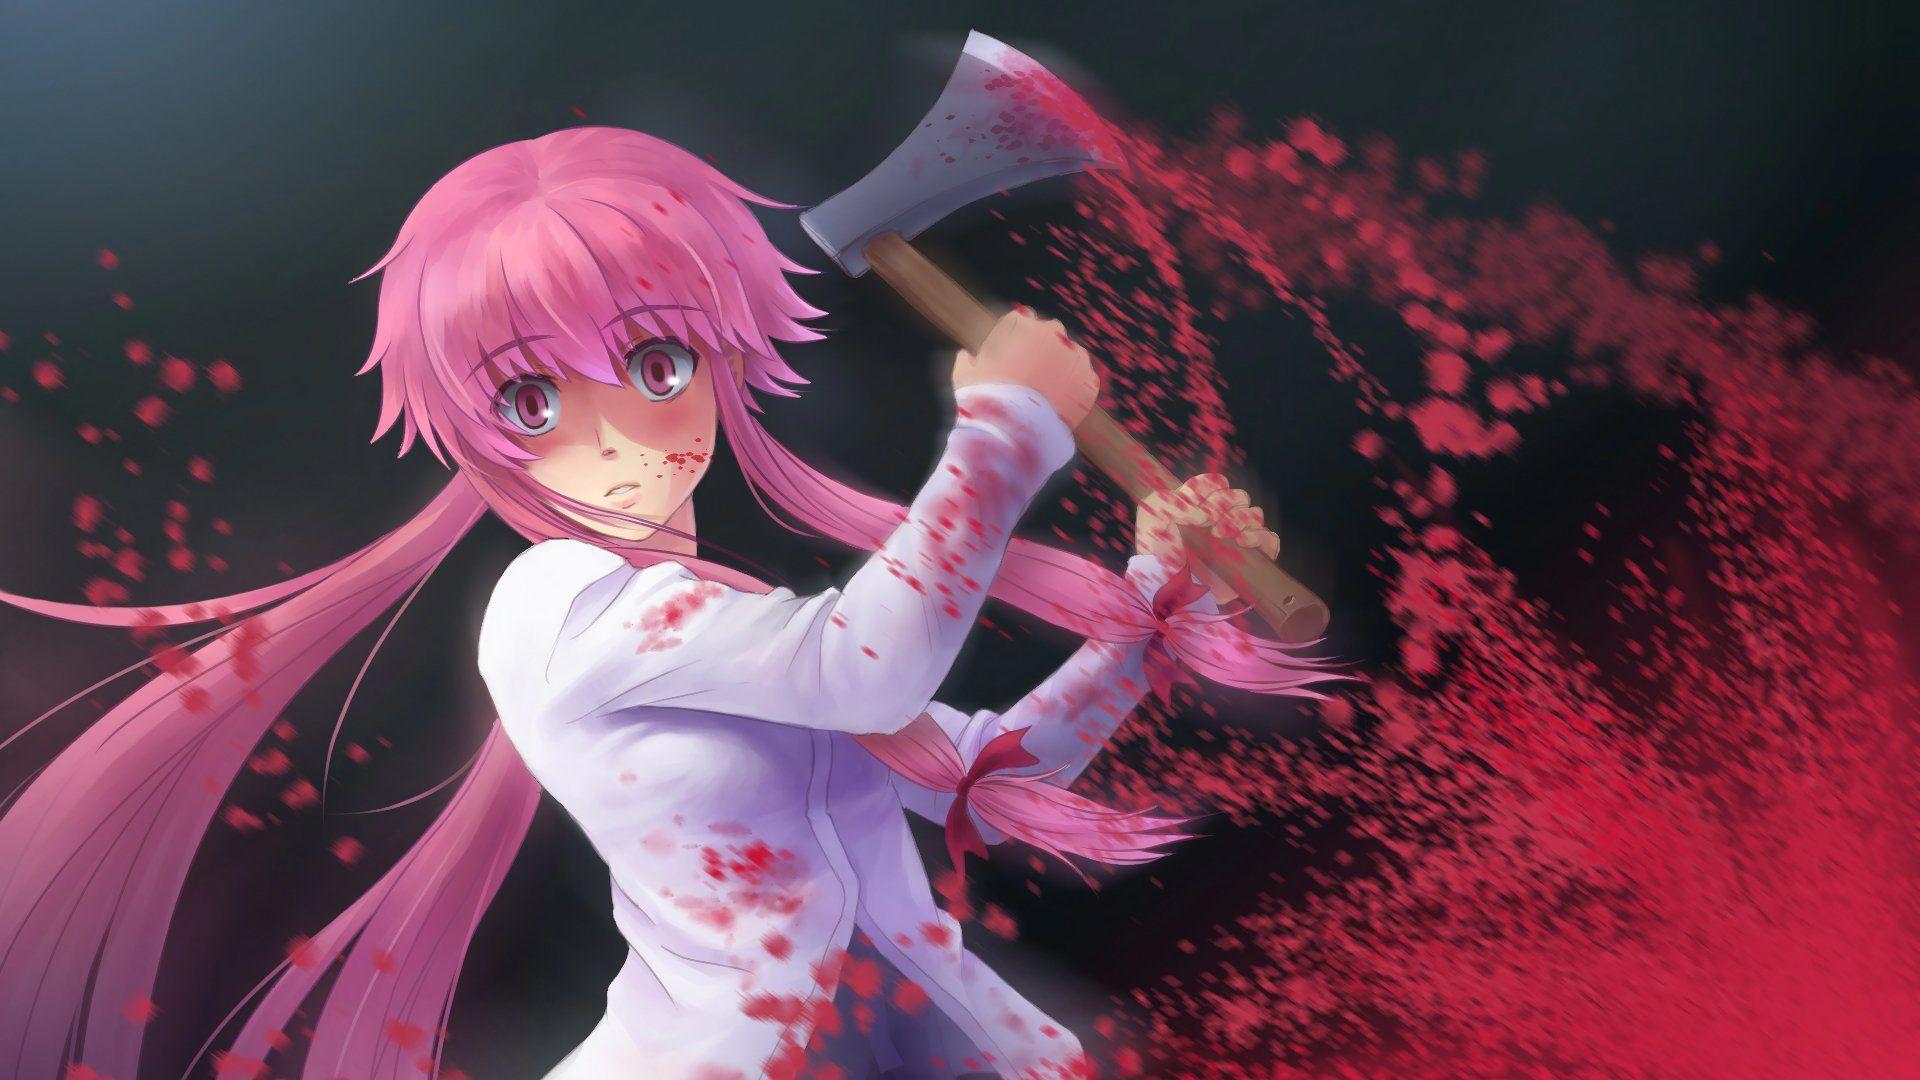 Future Diary Wallpapers - Wallpaper Cave.